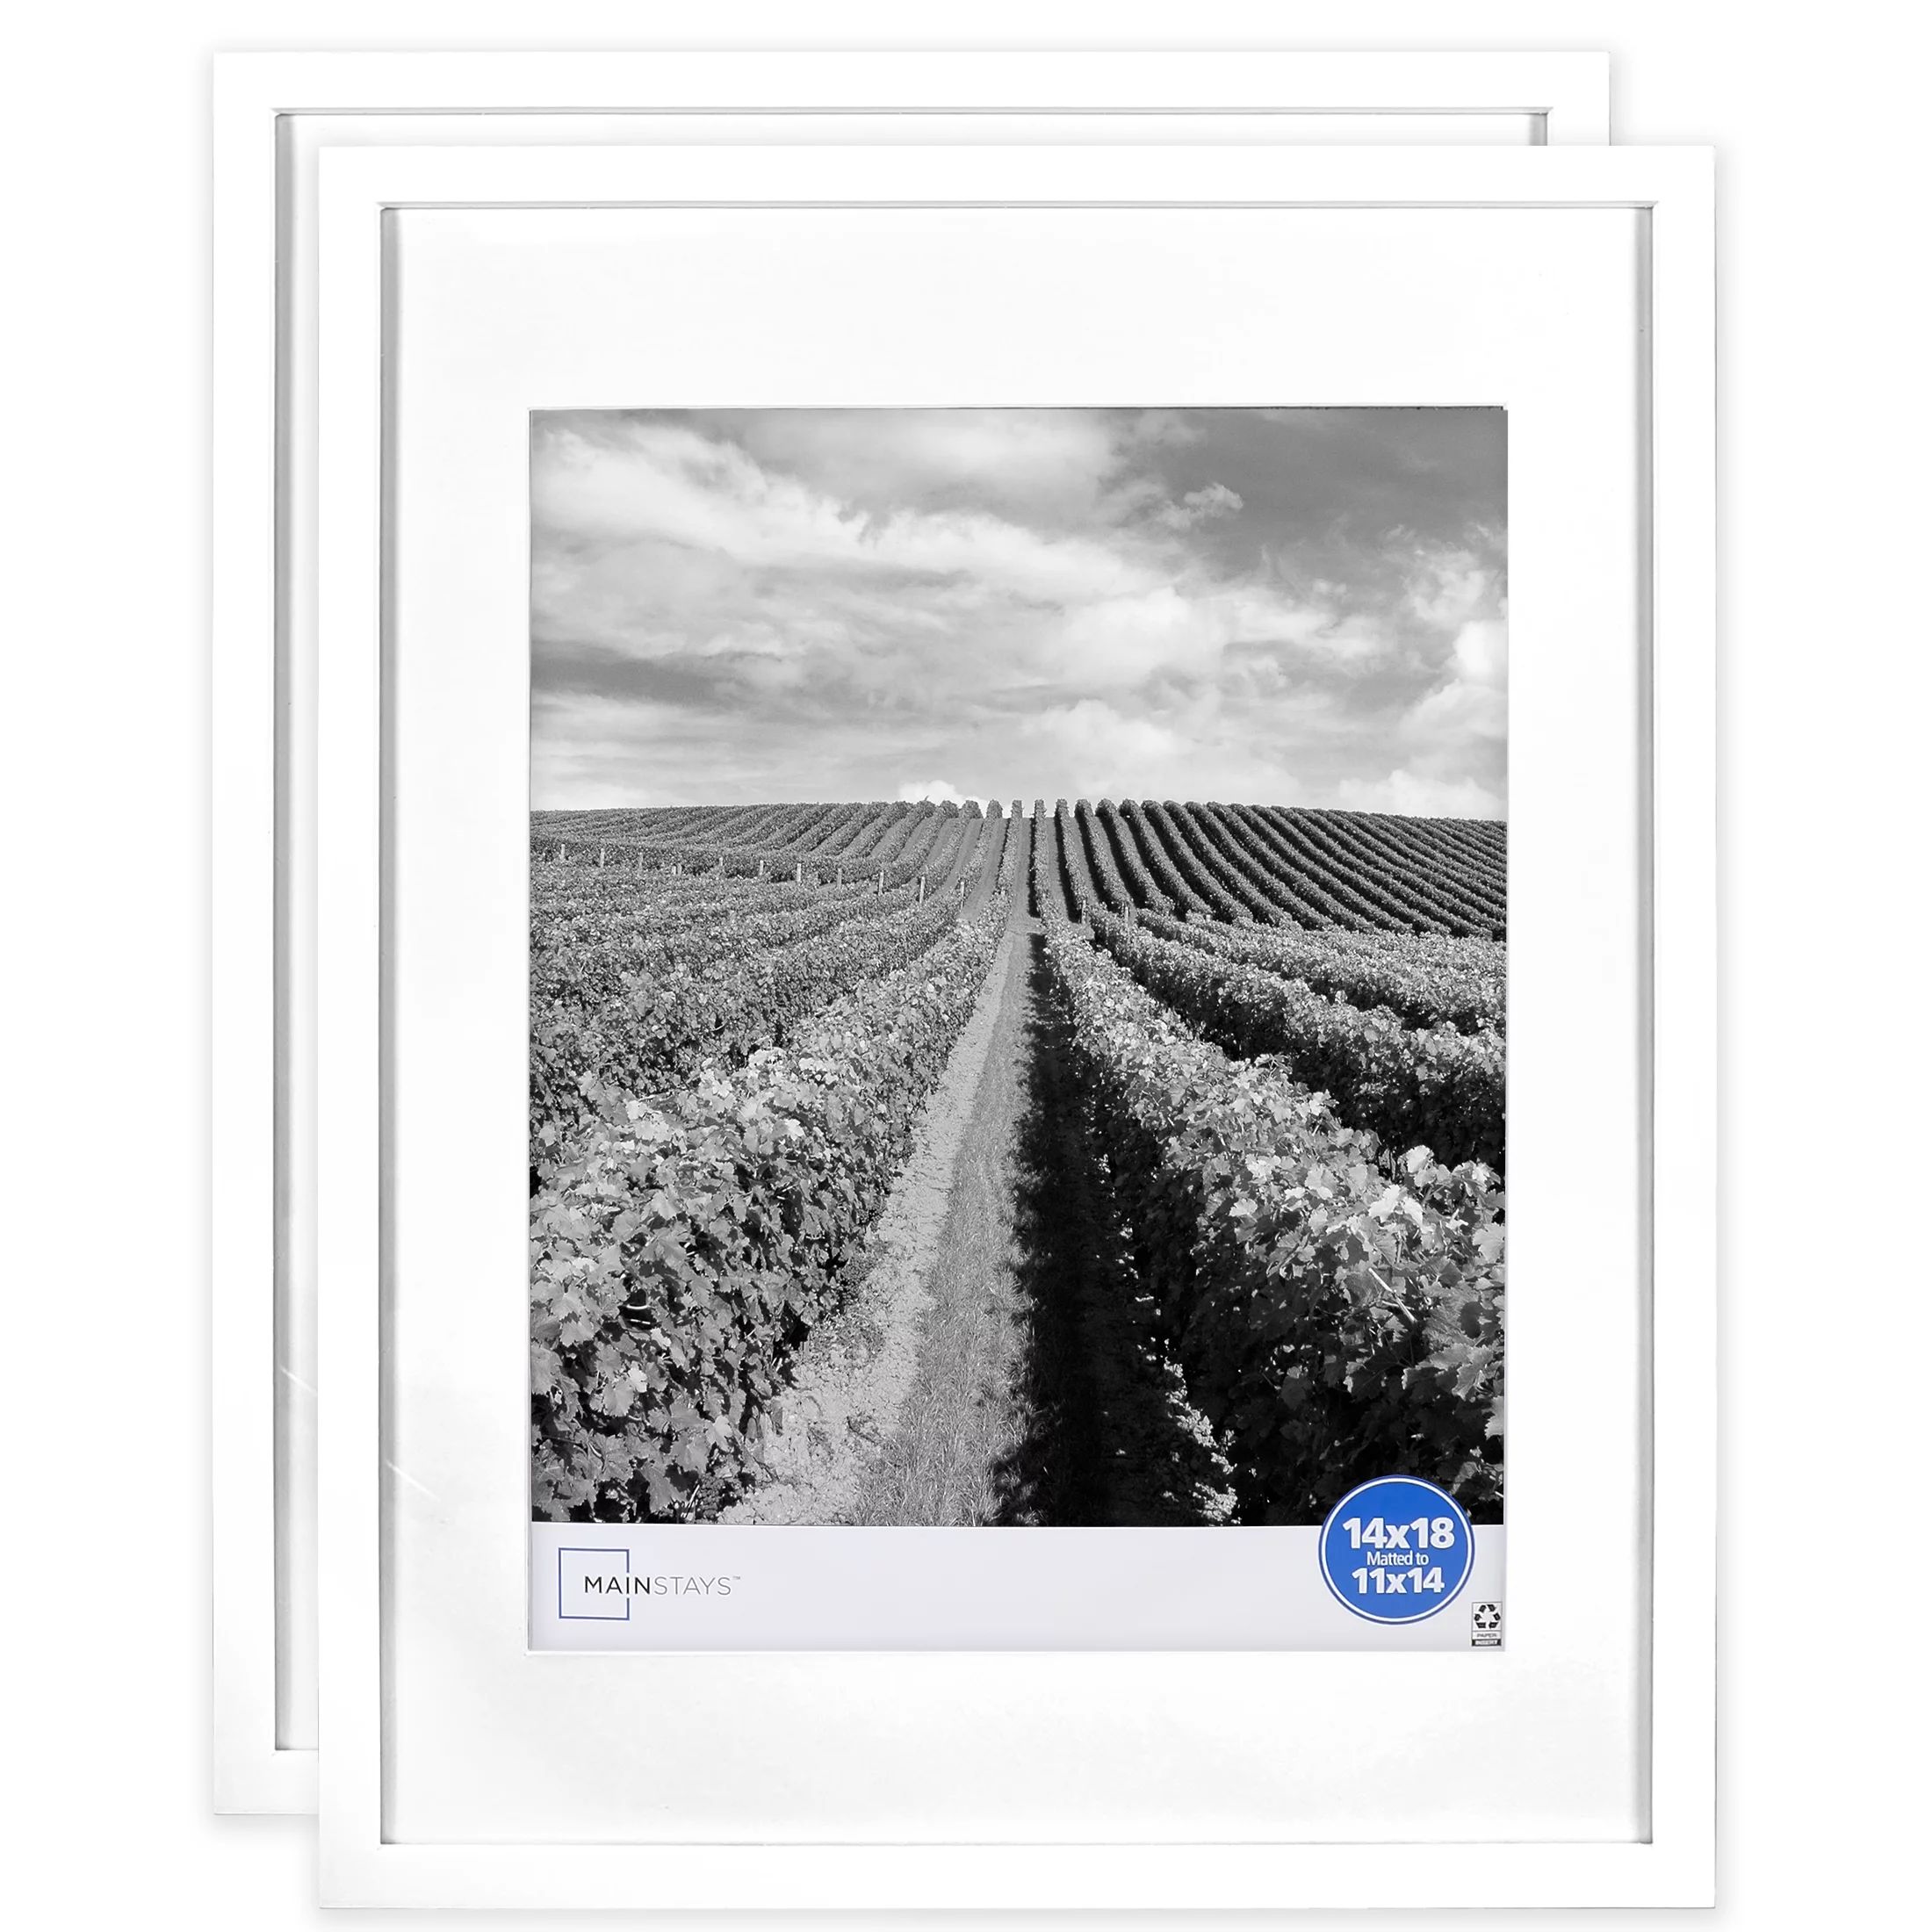 Mainstays 14x18 inch Matted to 11x14 inch White 0.5" Gallery Wall Picture Frame - 2 PC Set | Walmart (US)